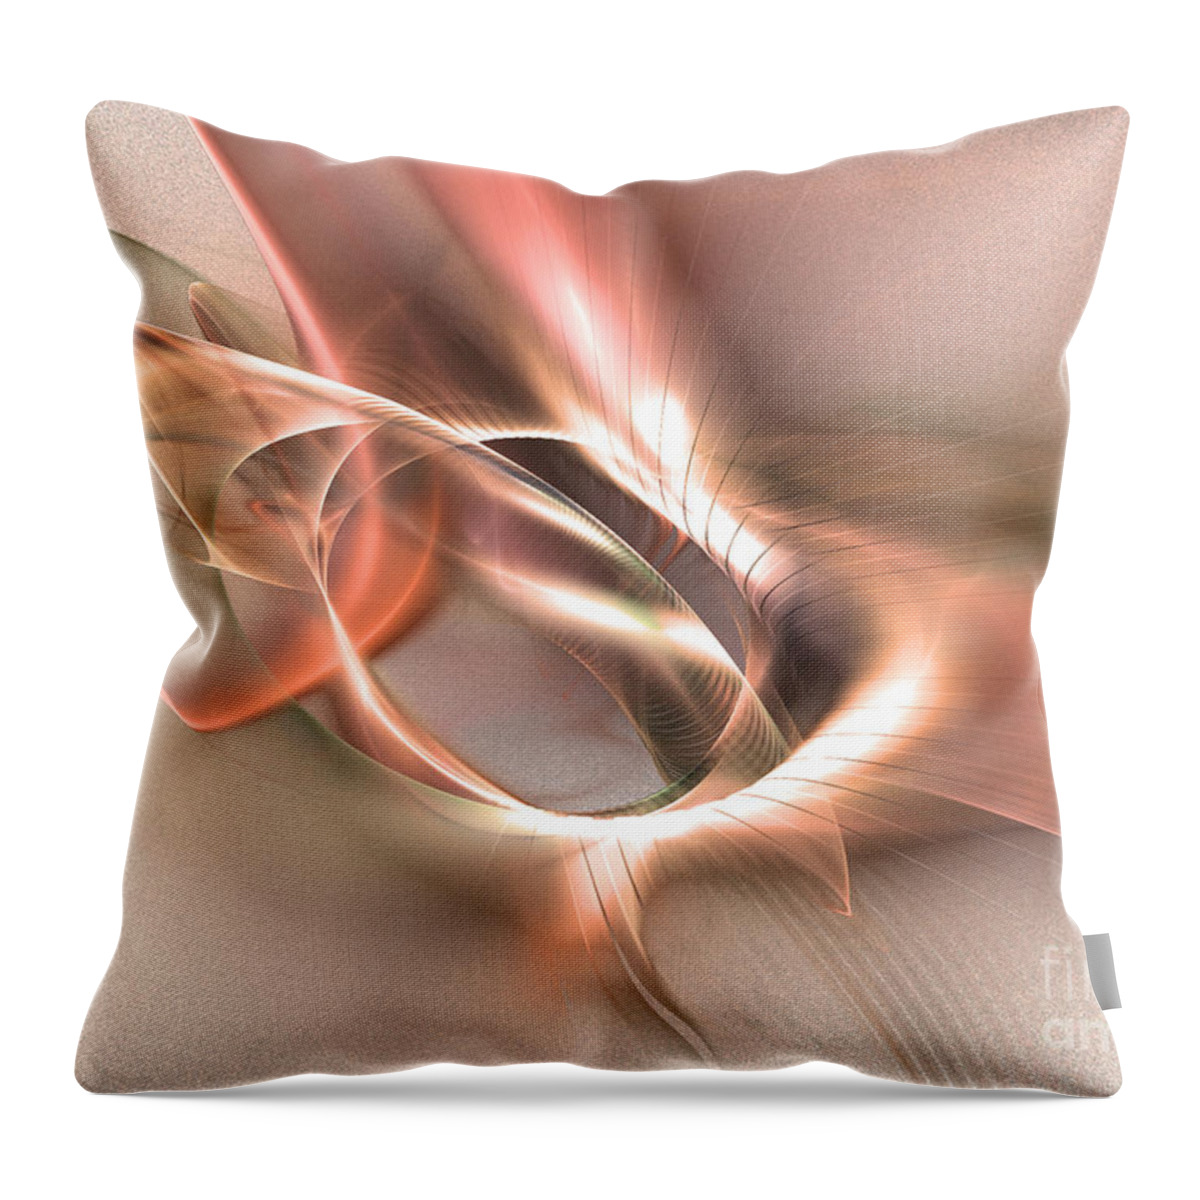 Fractal Throw Pillow featuring the digital art Sinuhe - Abstract art by Sipo Liimatainen